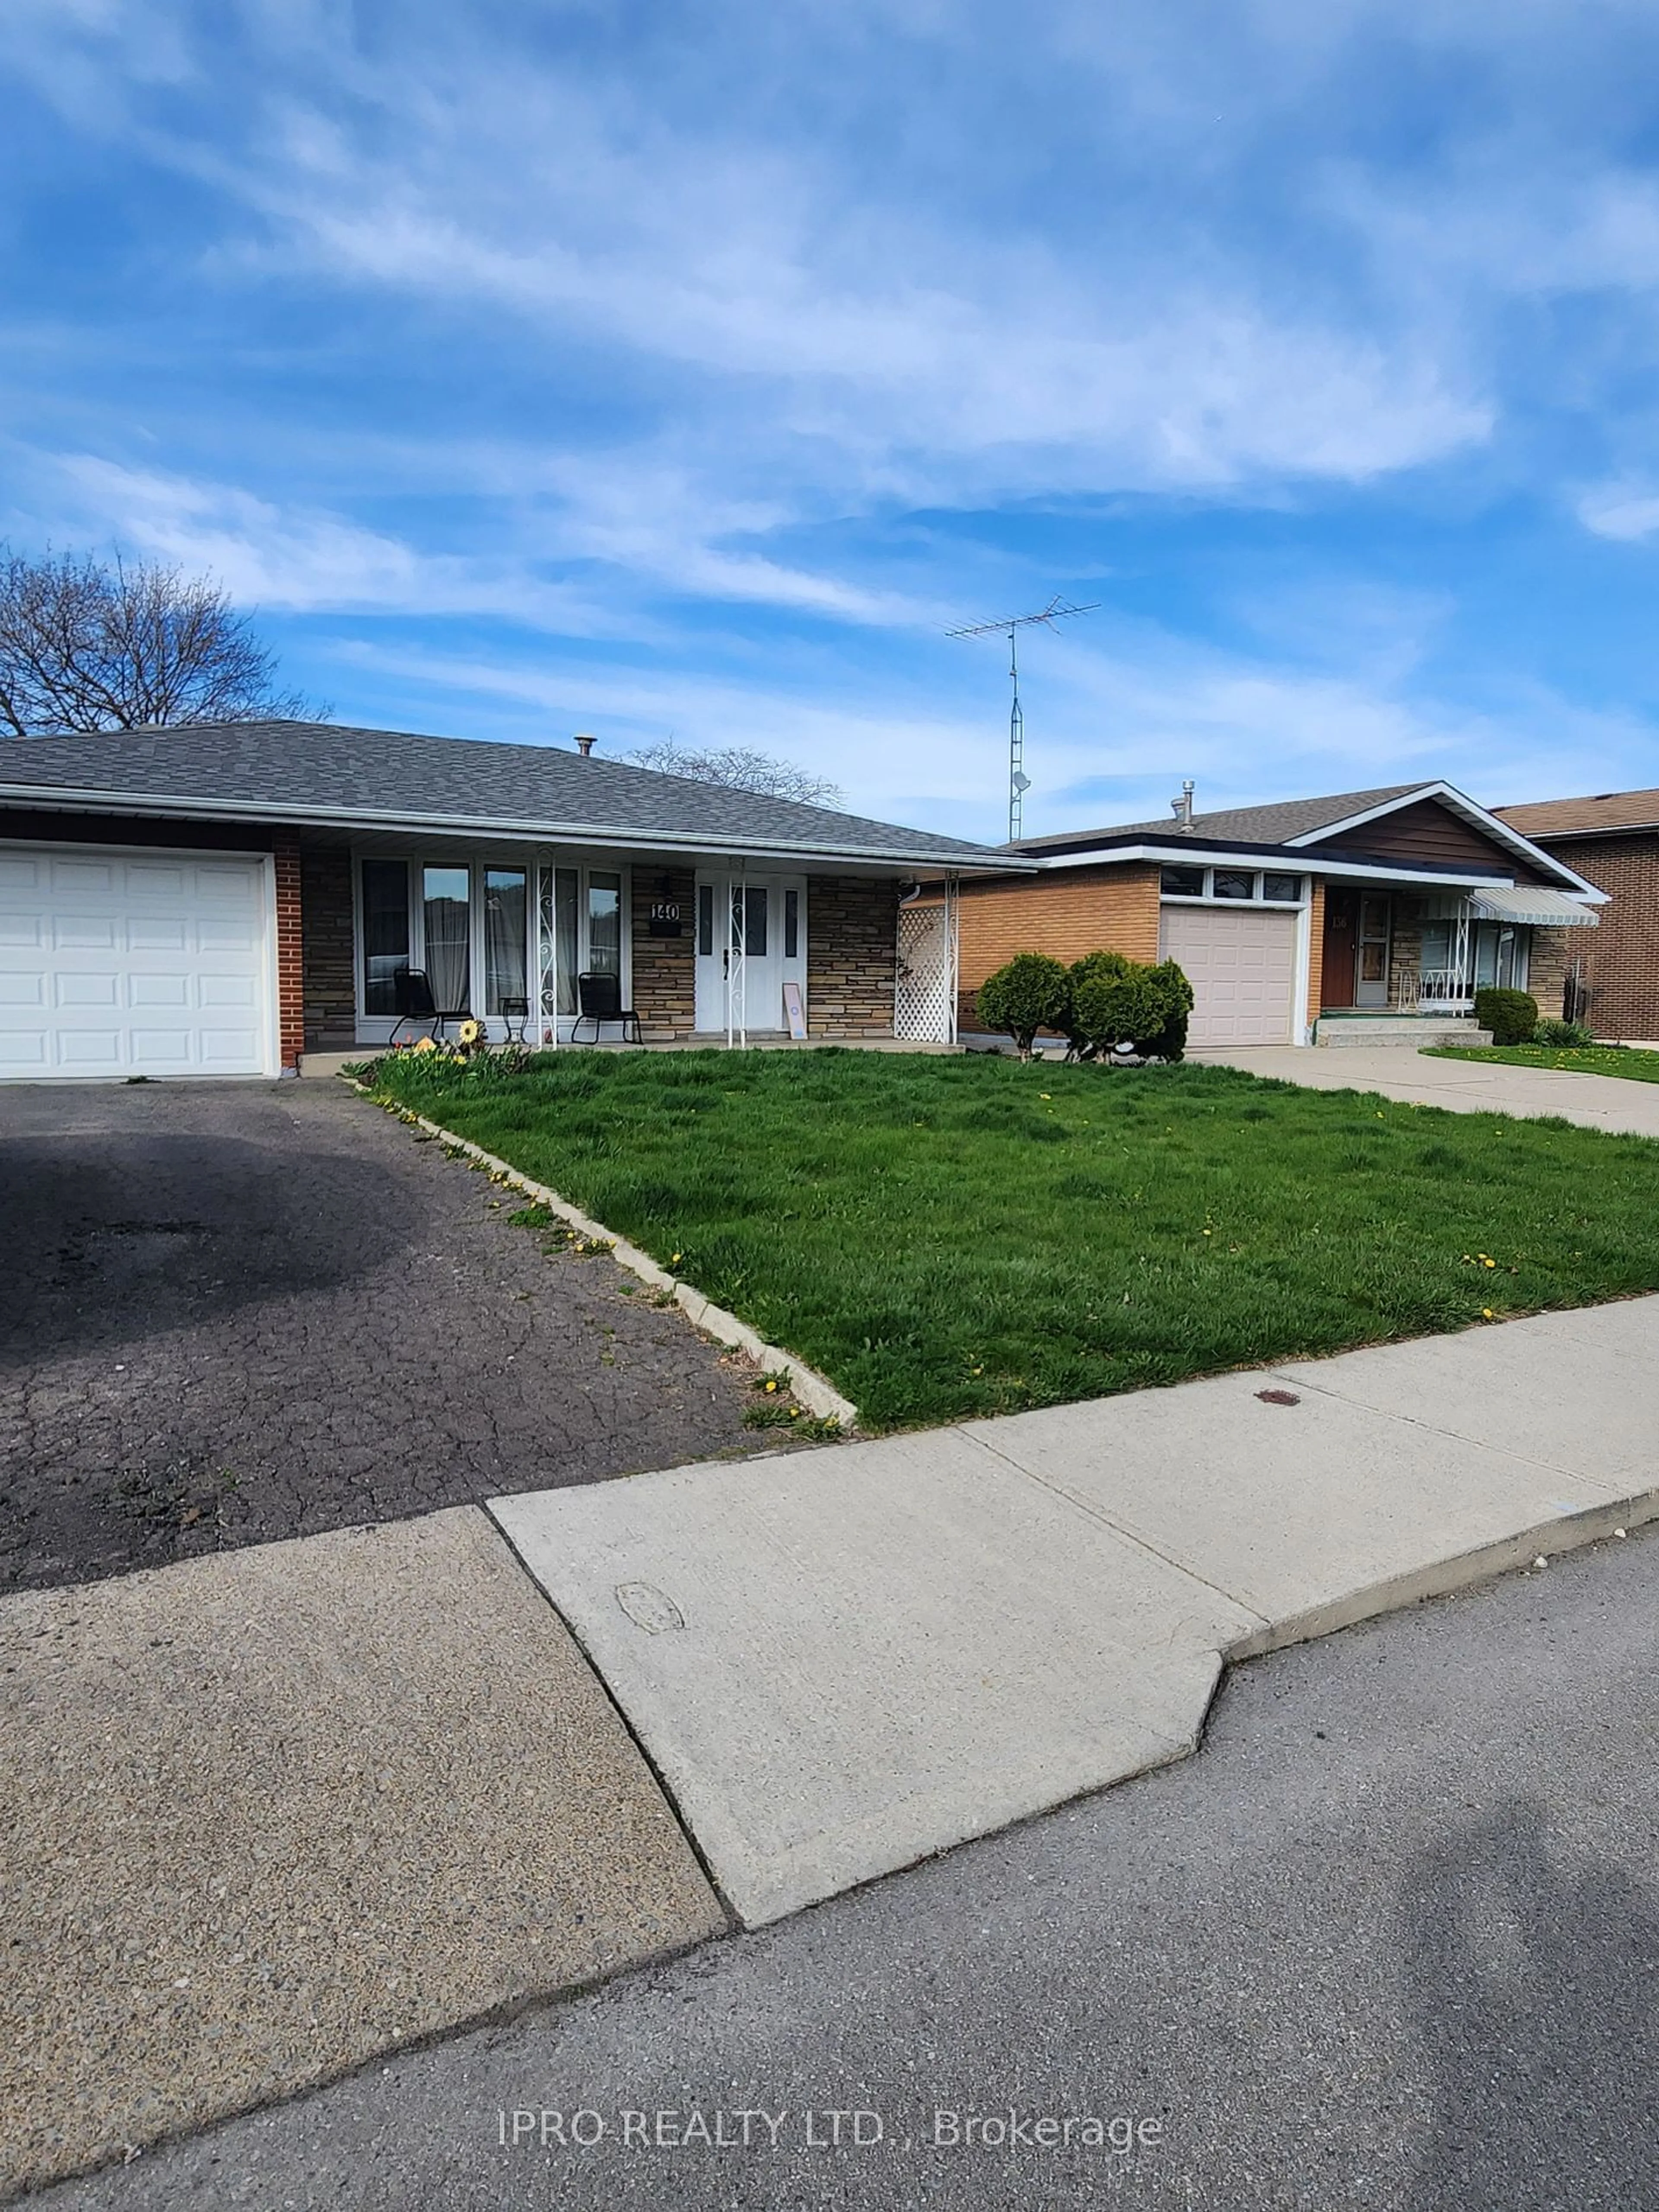 Frontside or backside of a home for 140 Cromwell Cres, Hamilton Ontario L8G 2G2